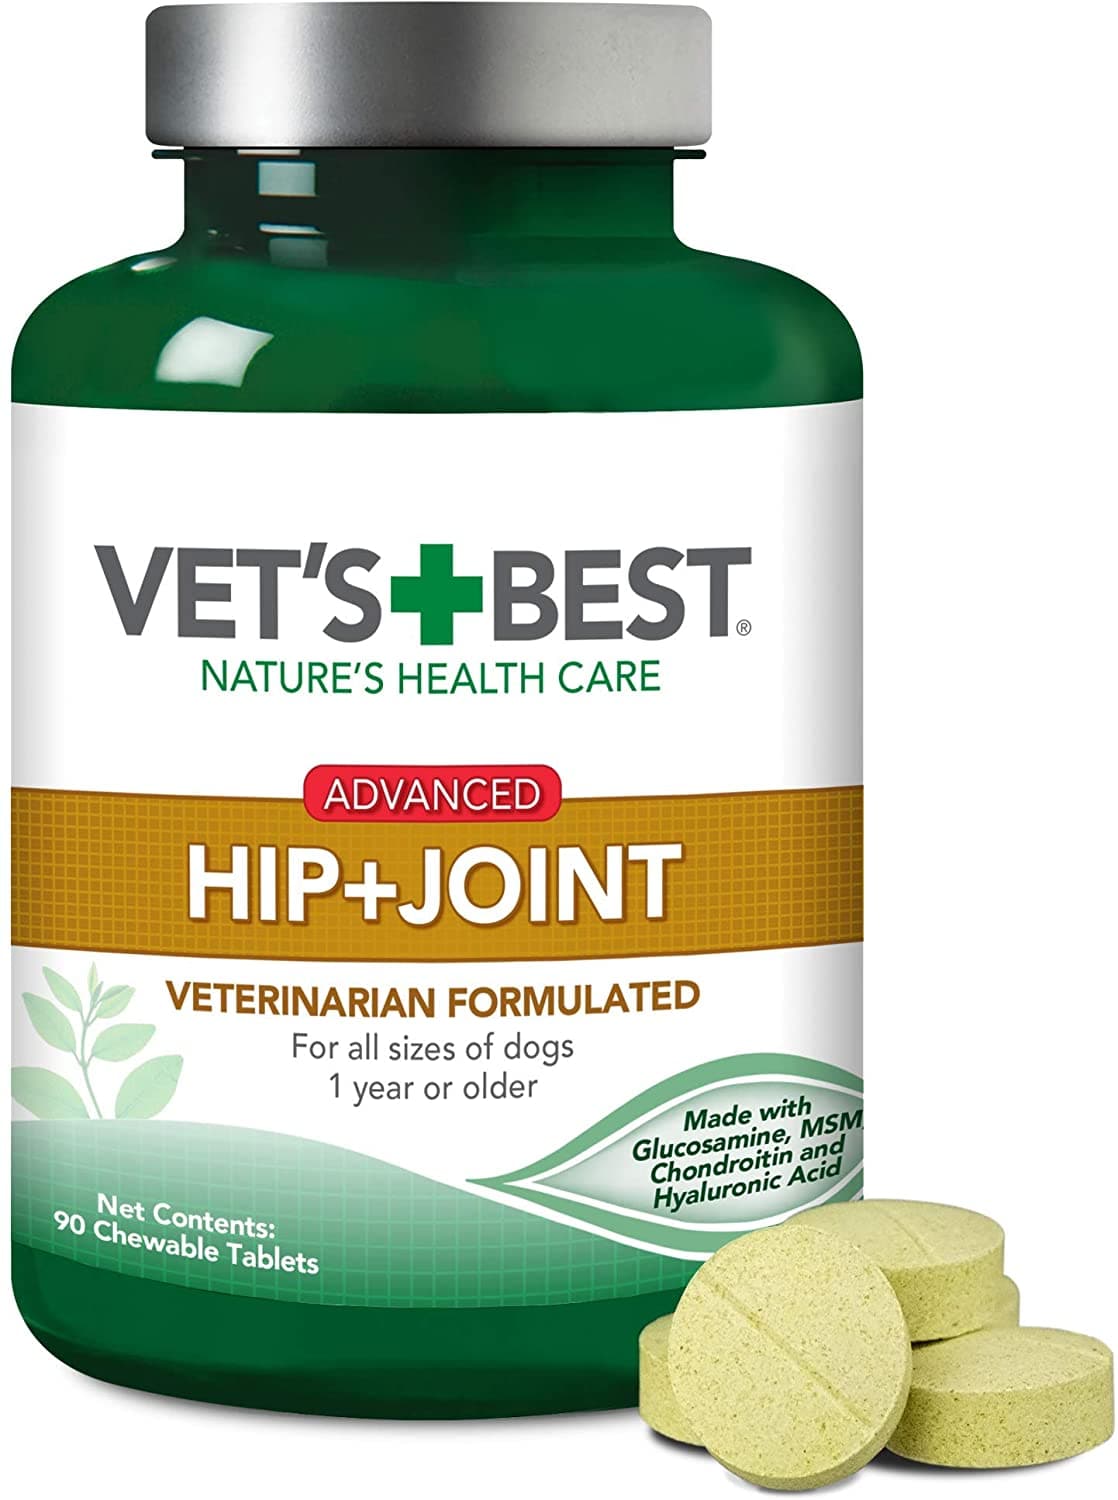 Advanced Hip+Joint Chewable Tablets